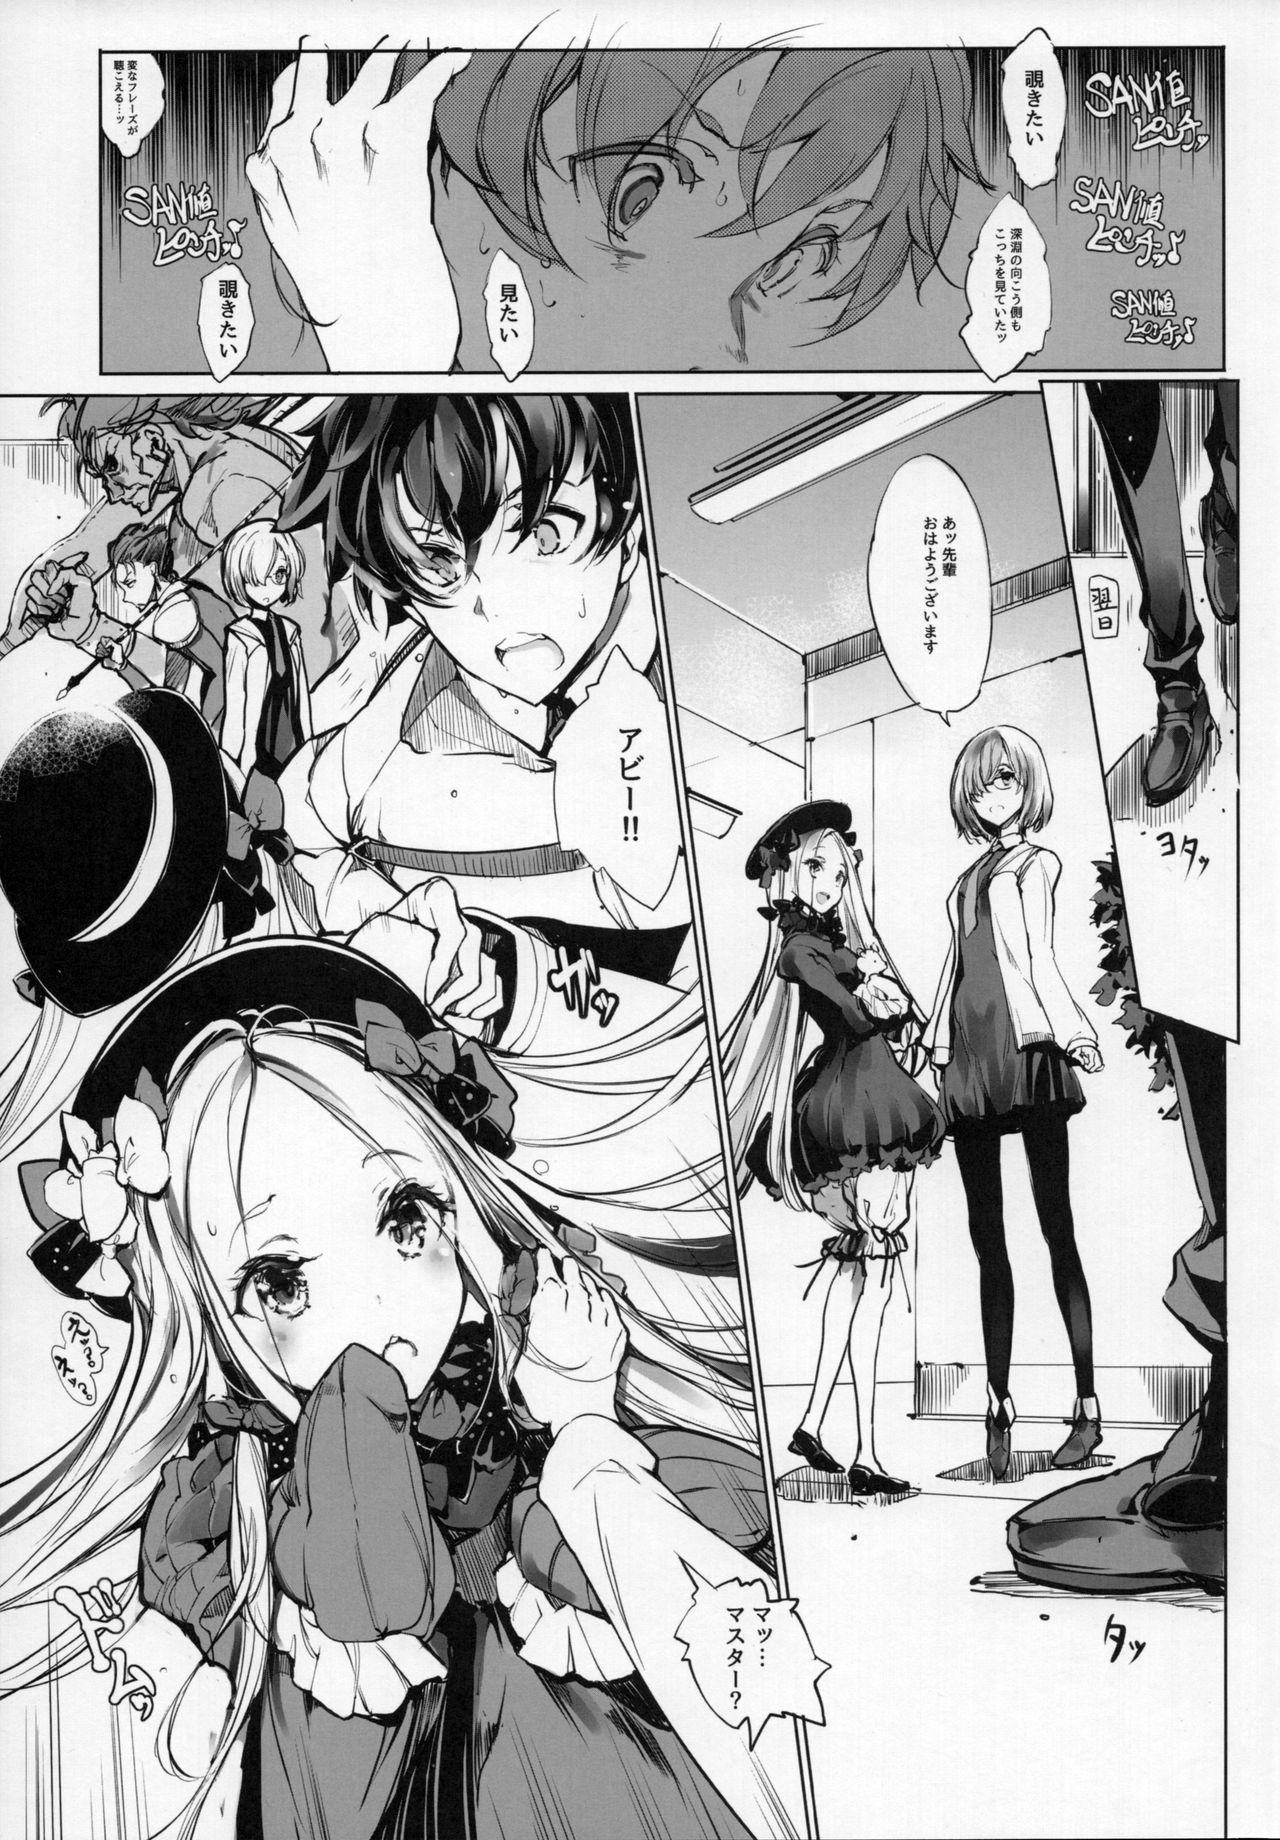 Aunty Sen no Ko o Haramu Mori no Shoujo - The girl of the woods with a thousand young - Fate grand order Groping - Page 6